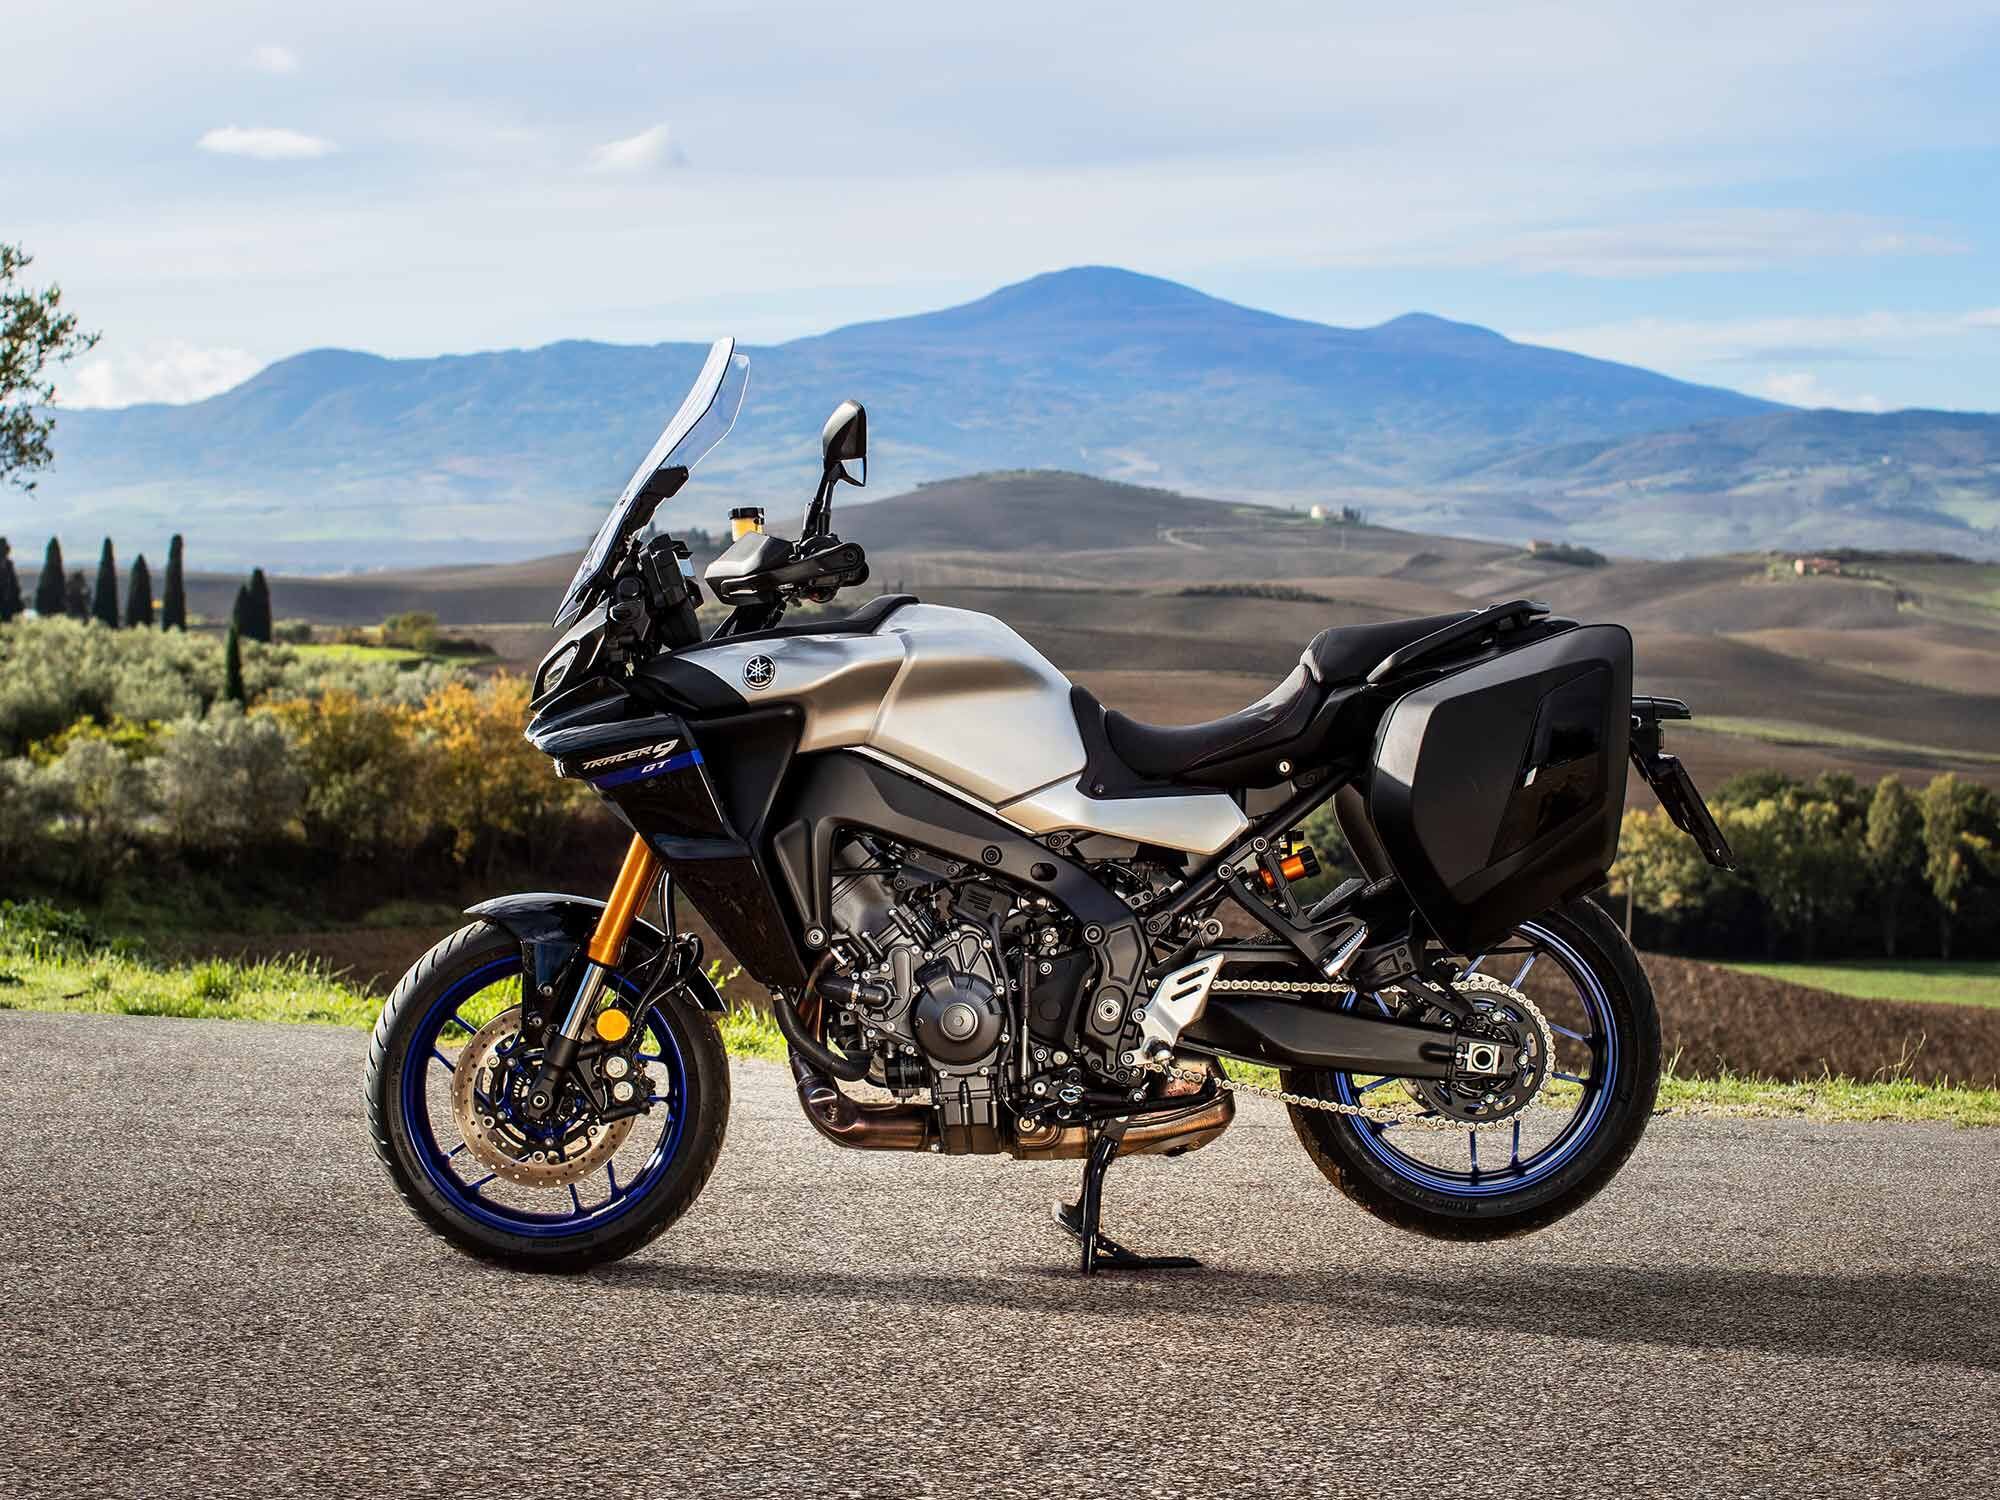 Yamaha claims the Tracer 9 GT achieves 49 mpg.